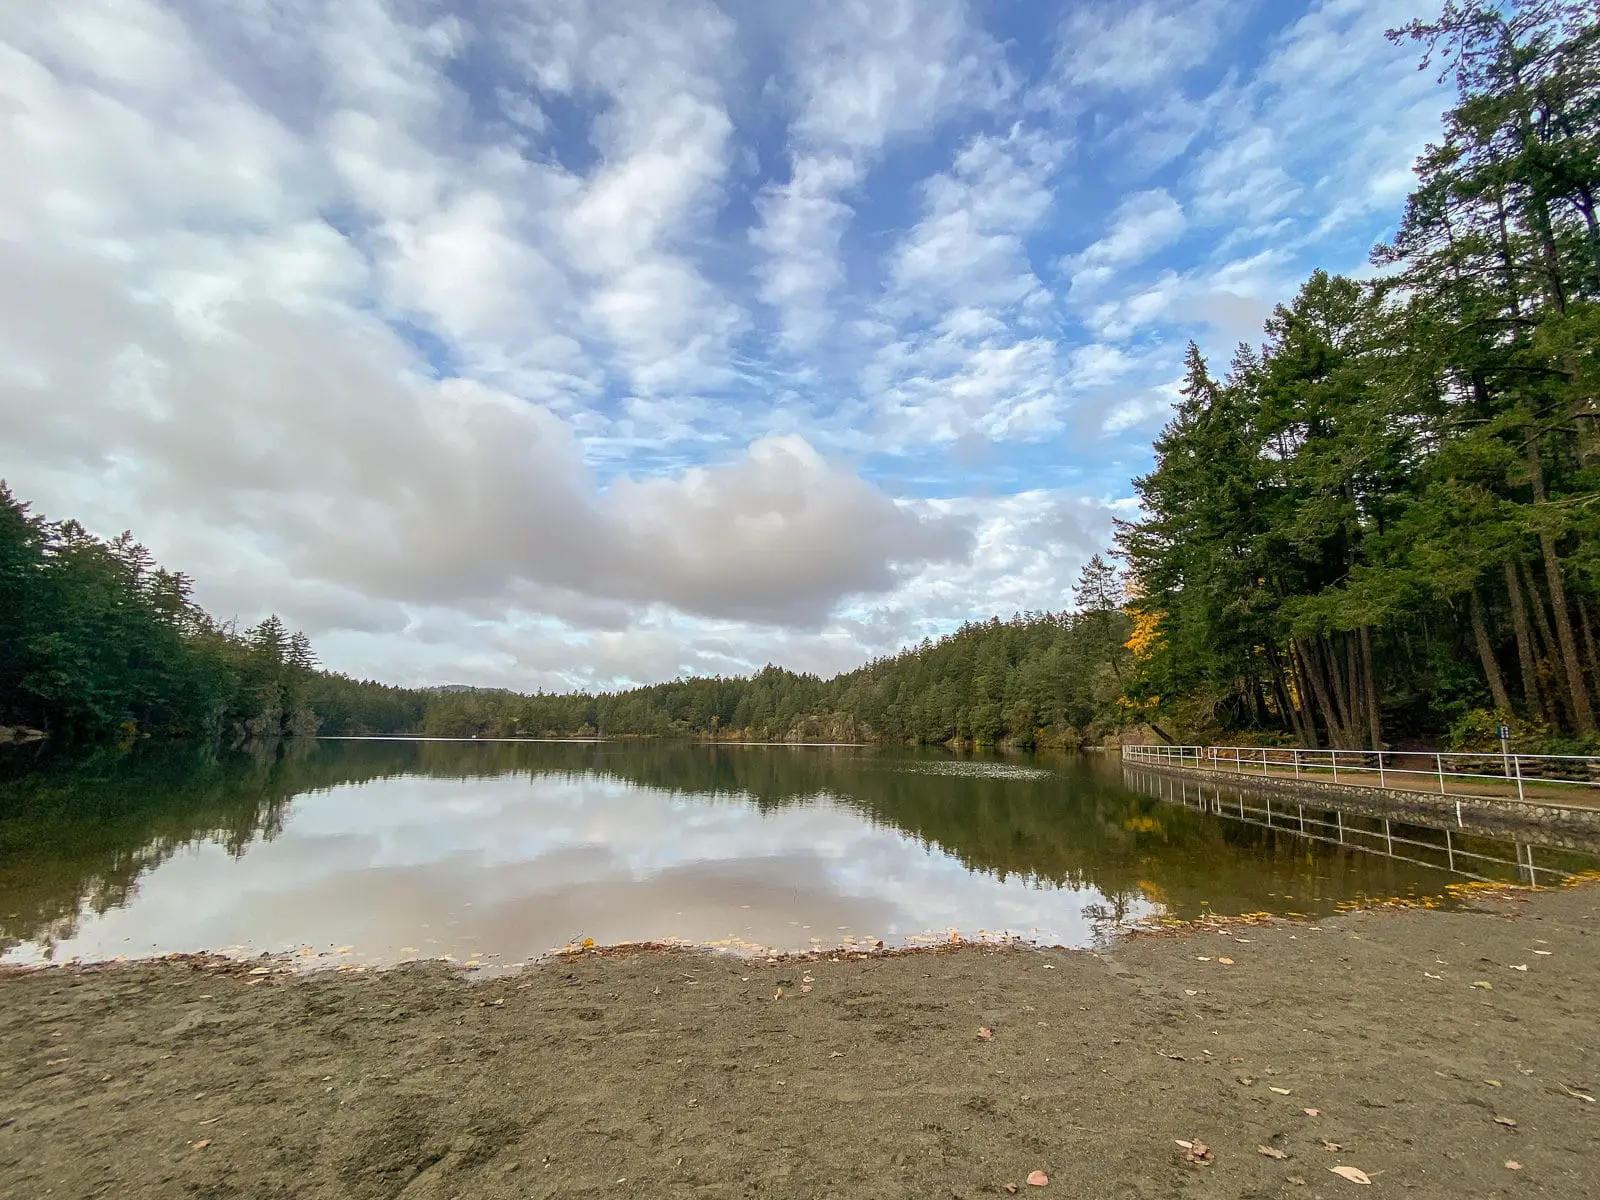 The main beach at Thetis Lake in Victoria, BC during autumn